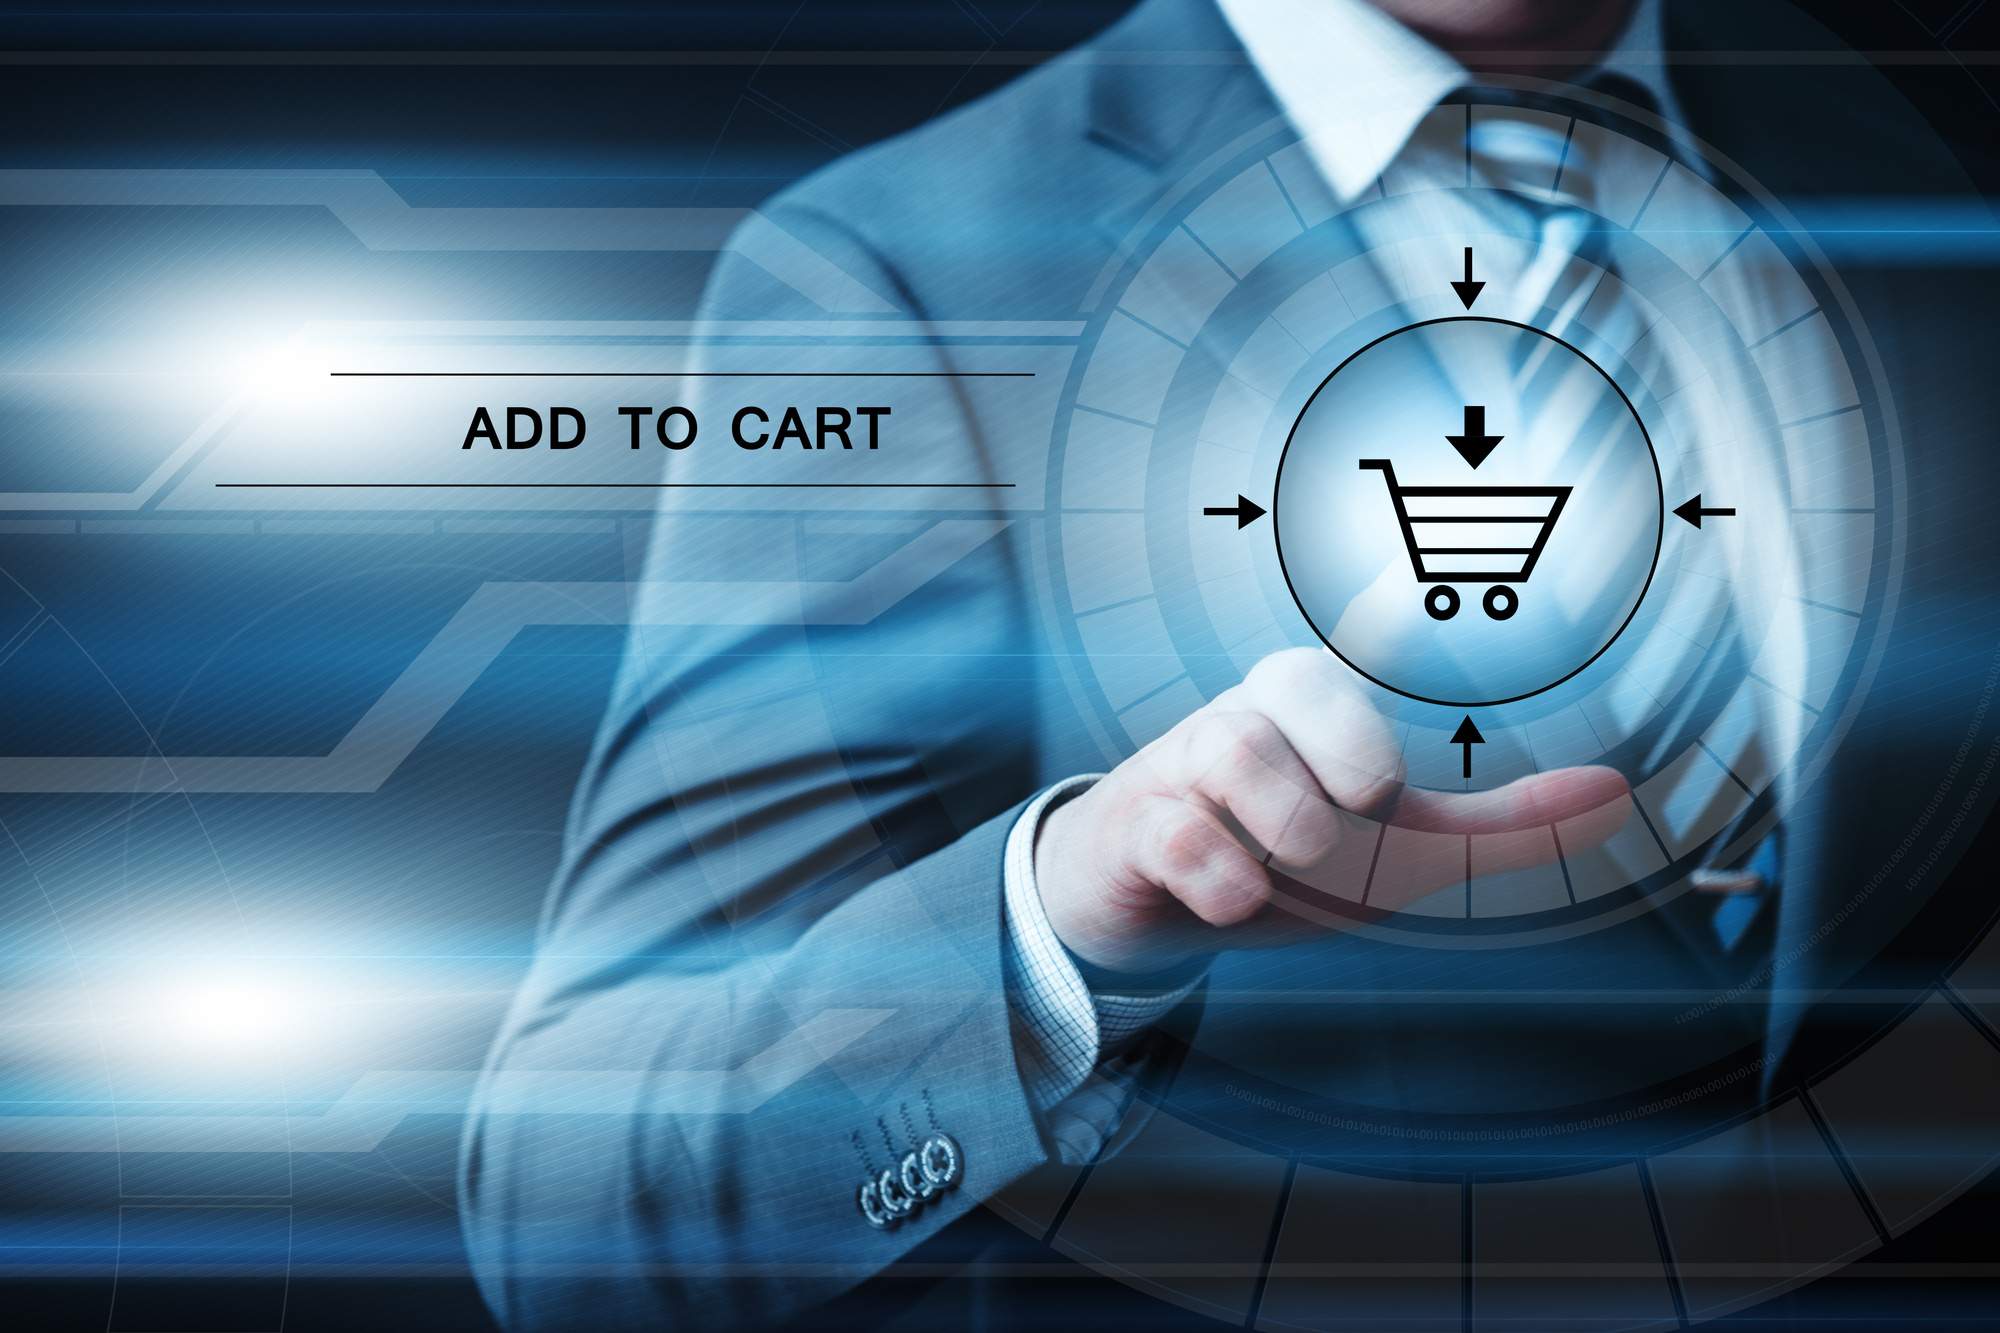 4 Important Tips for Starting an Ecommerce Business